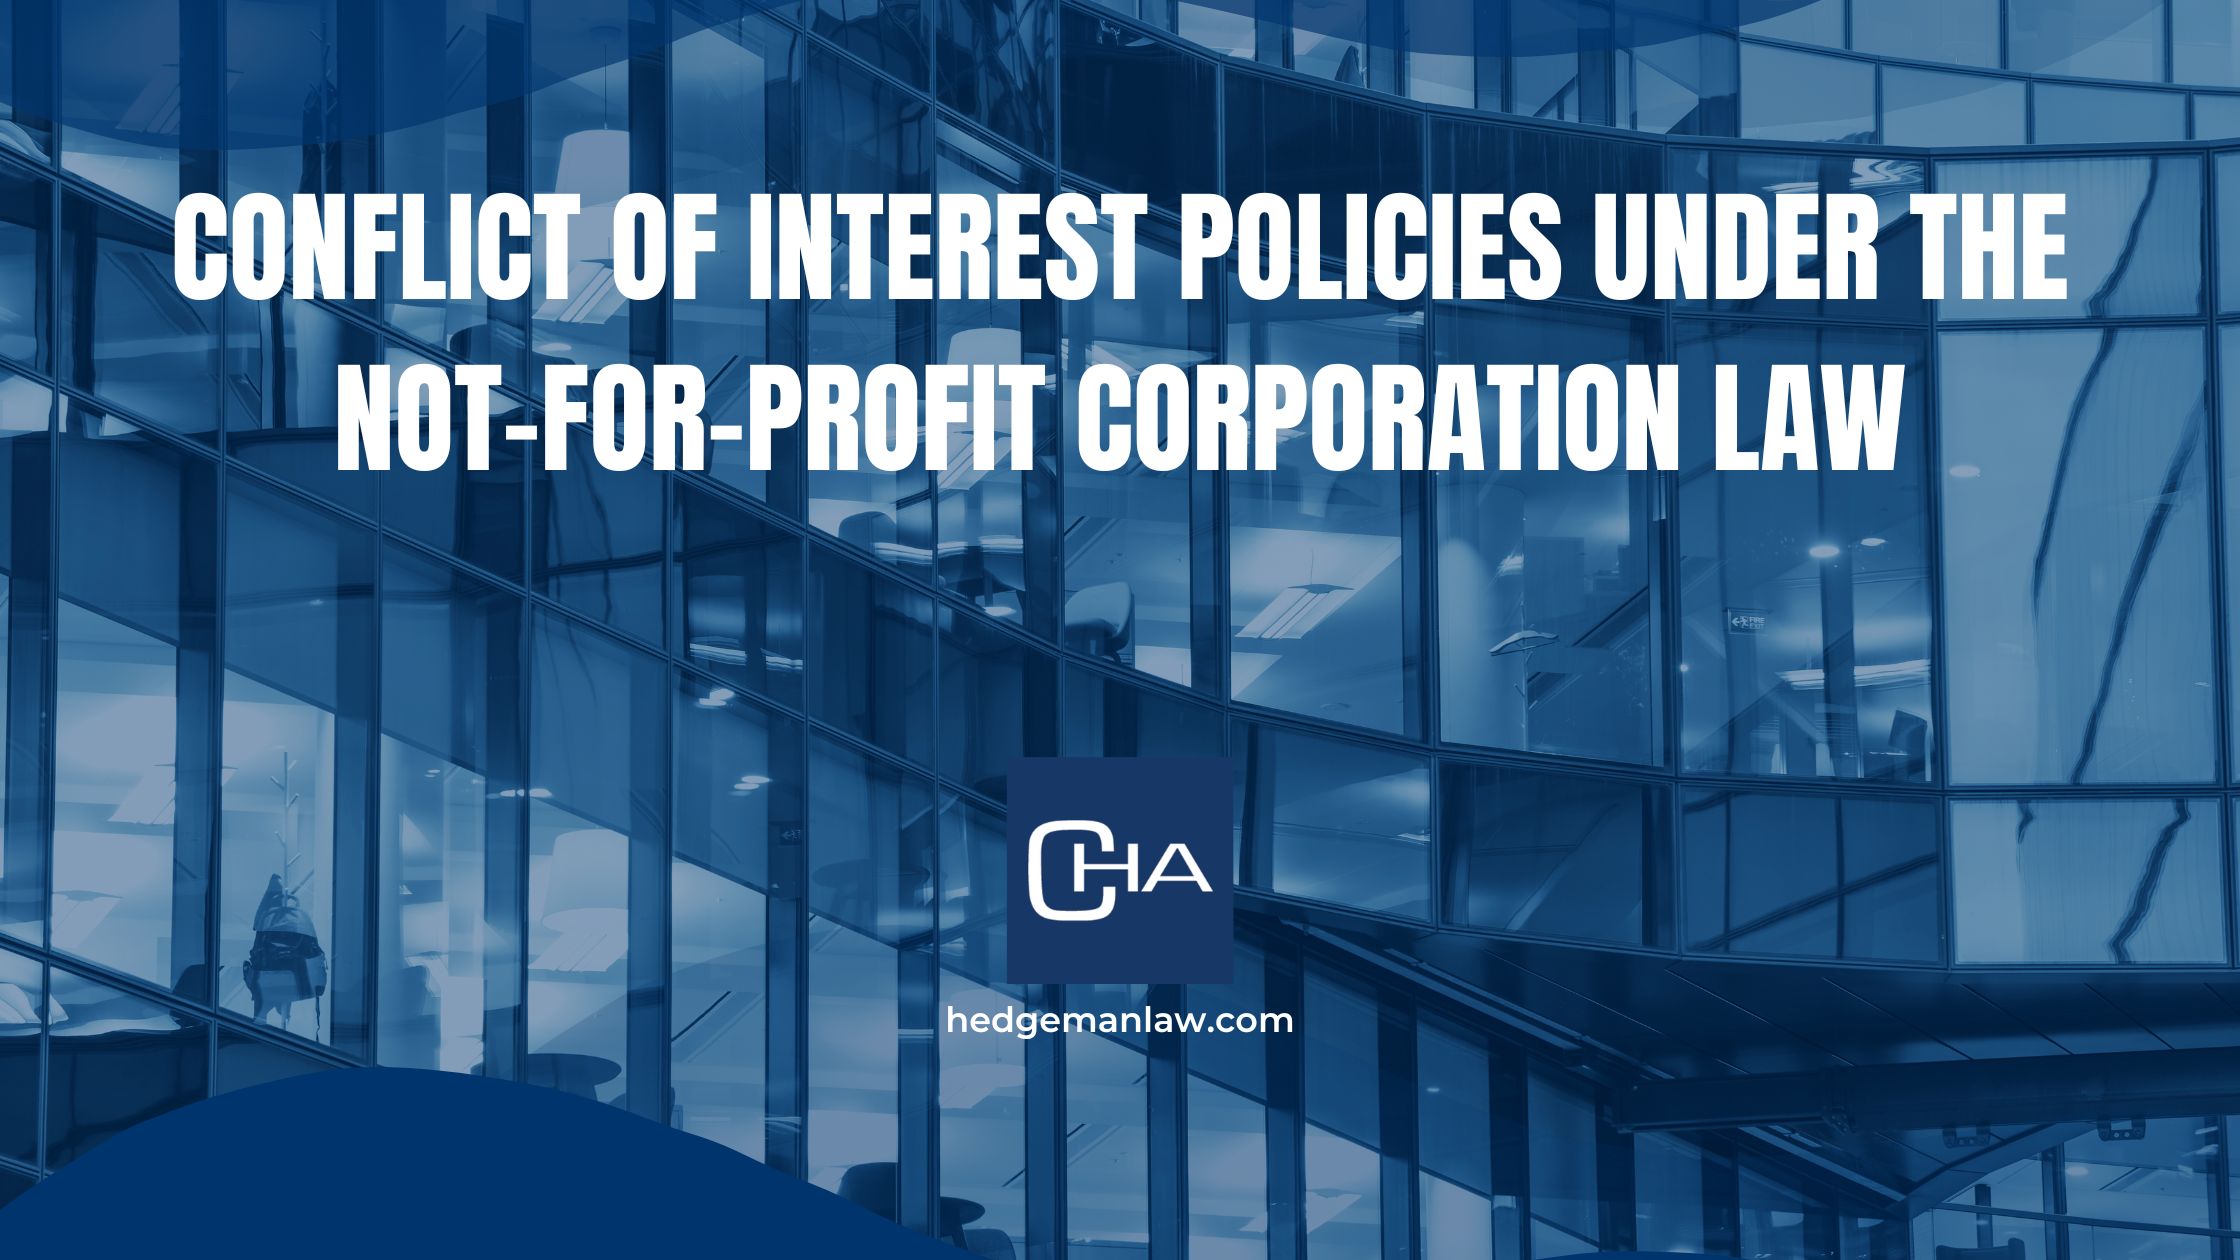 Conflict Of Interest Policies Under the Not-for-Profit Corporation Law